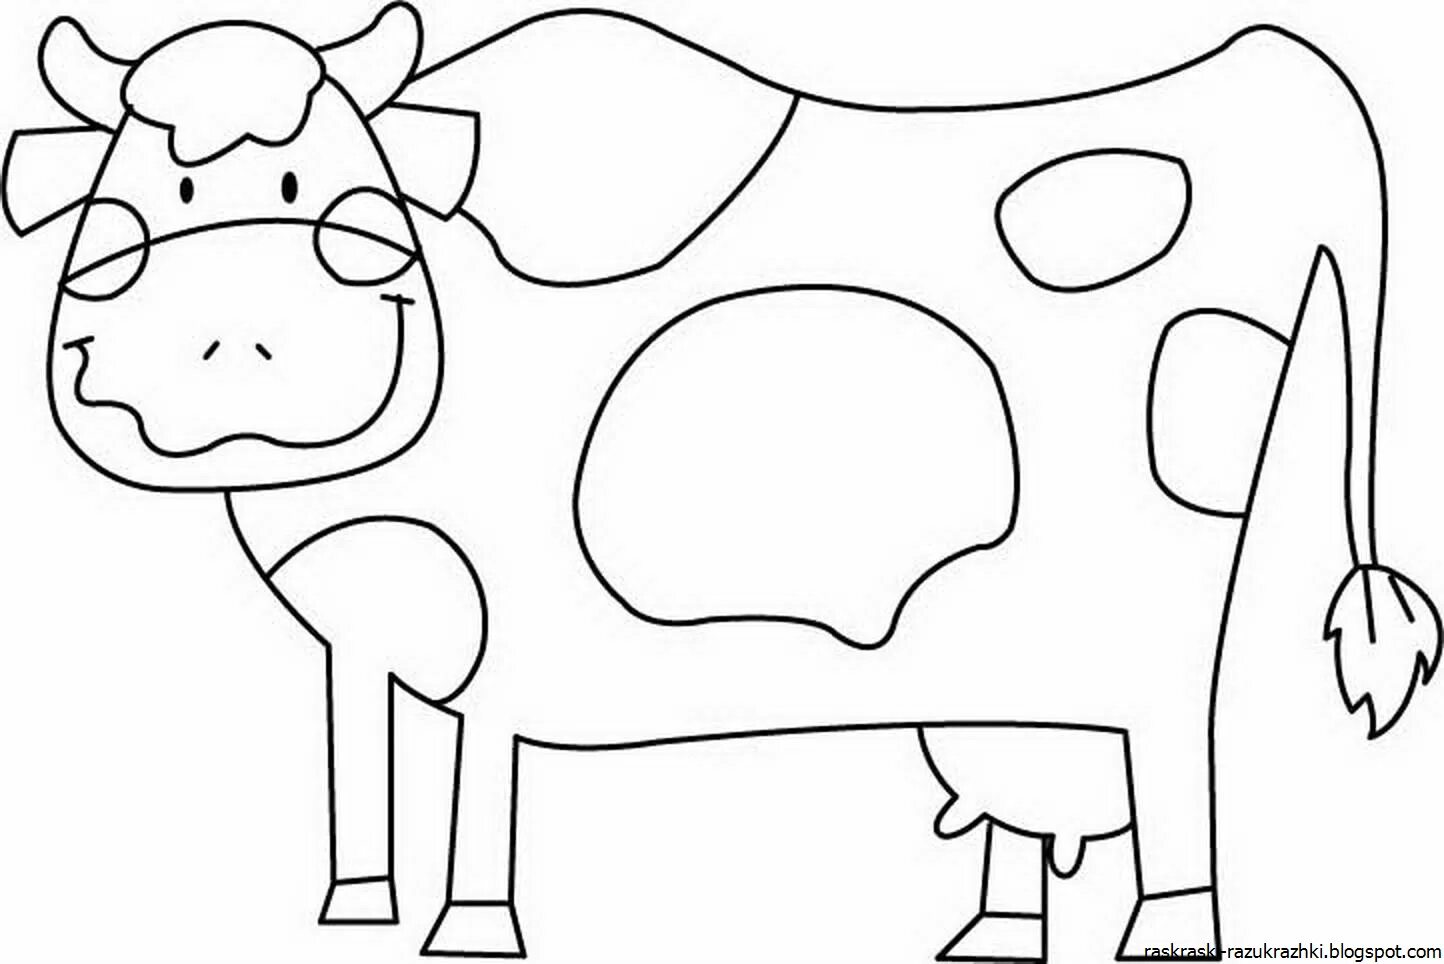 Cow coloring page for toddlers 2 3 years old